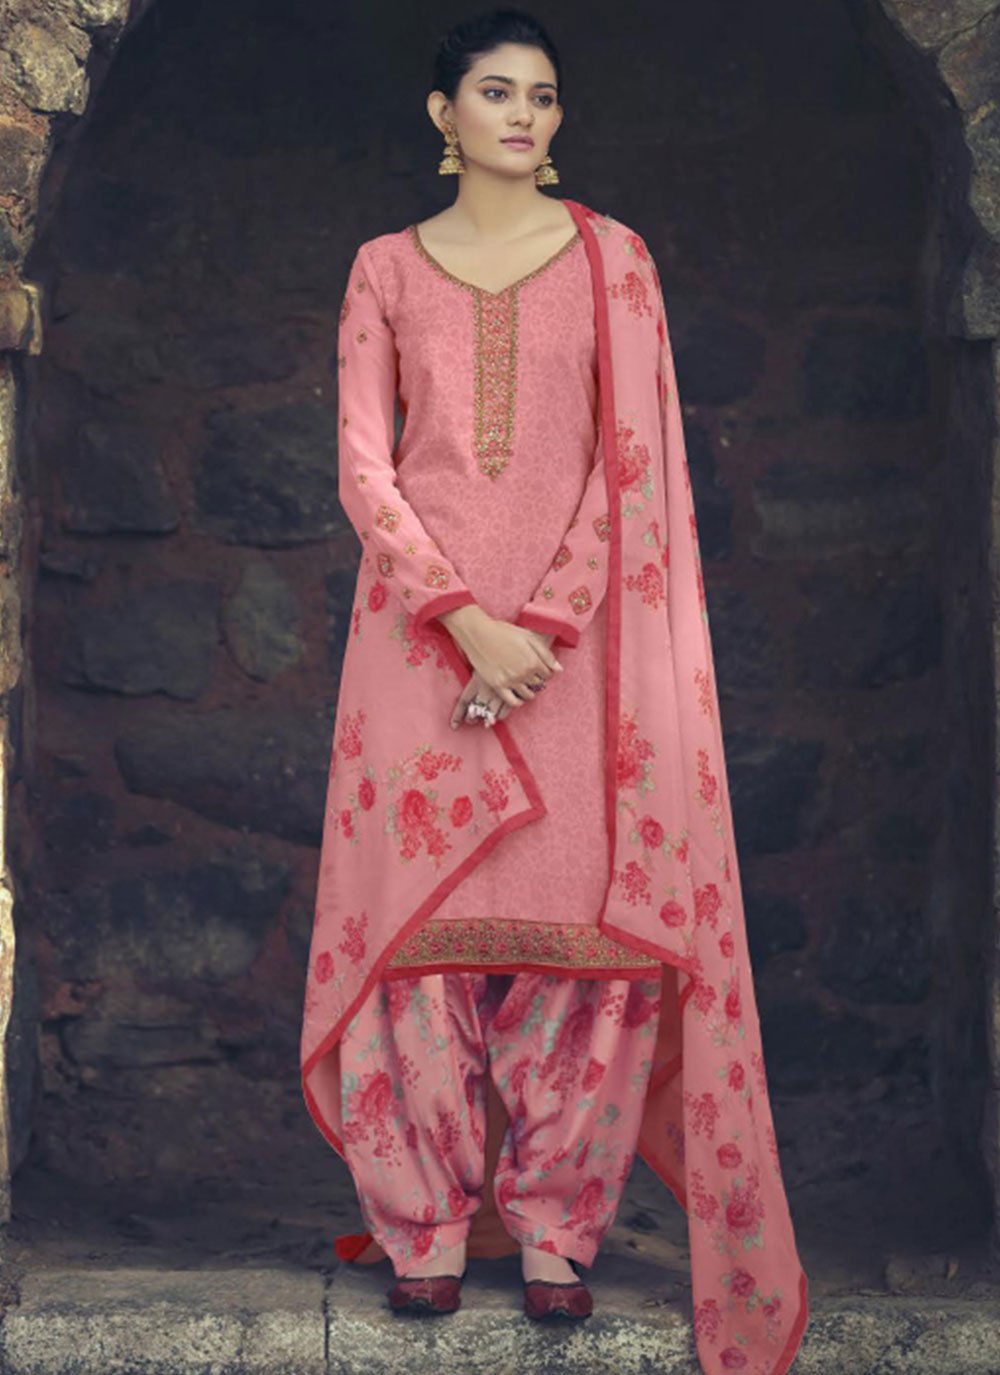 Faux Crepe Embroidered Salwar Suit